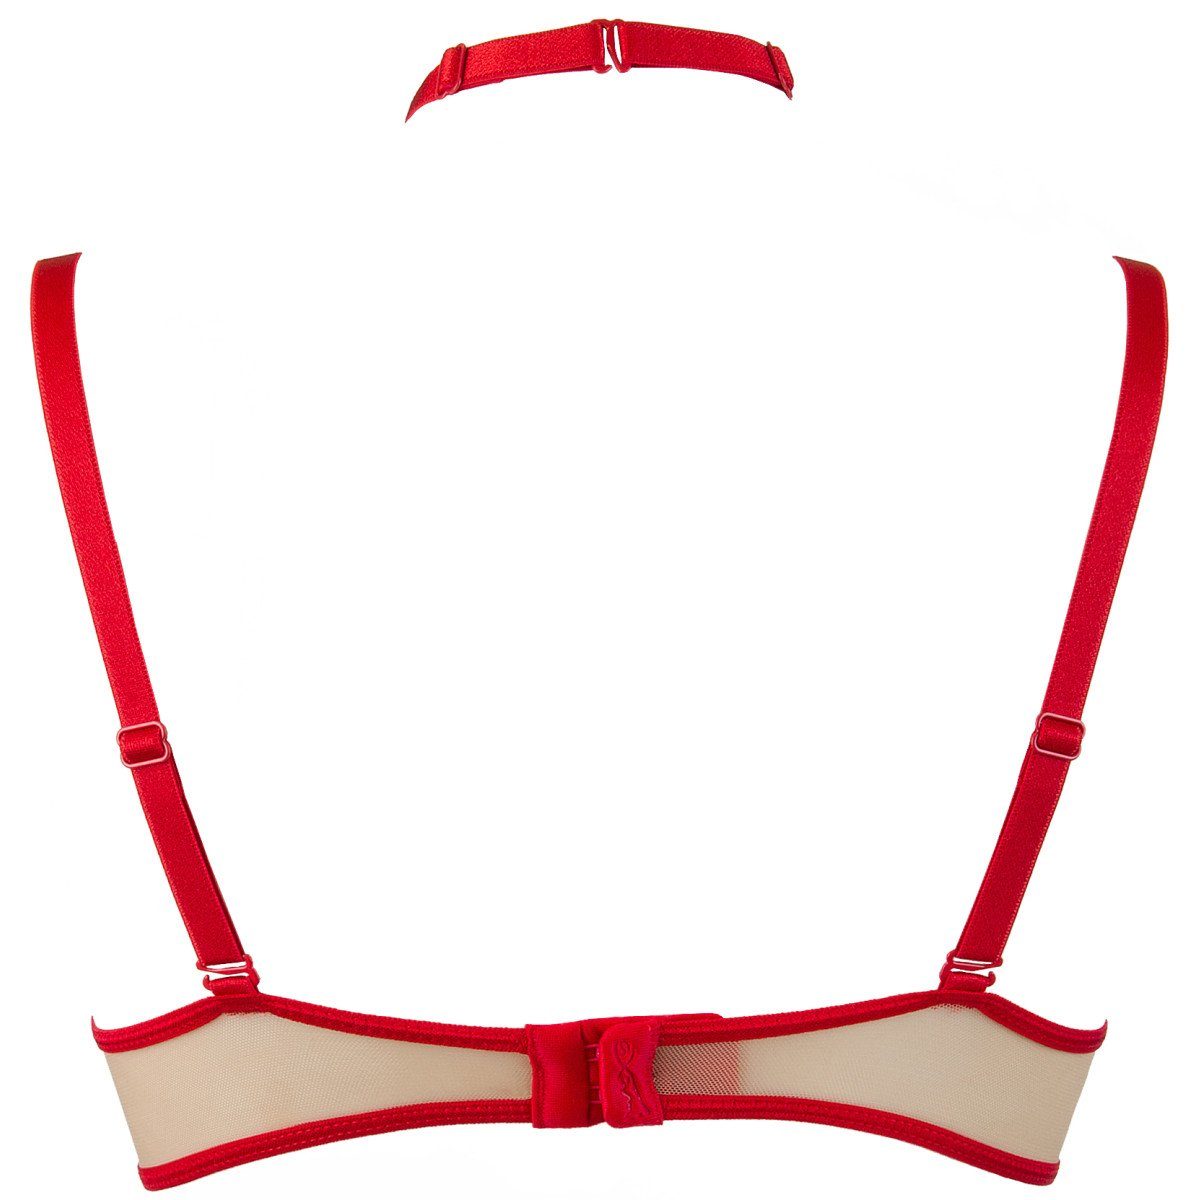 Axami Bustier V-9651 bra cups with - (L/XL,S/M,XSS) open red